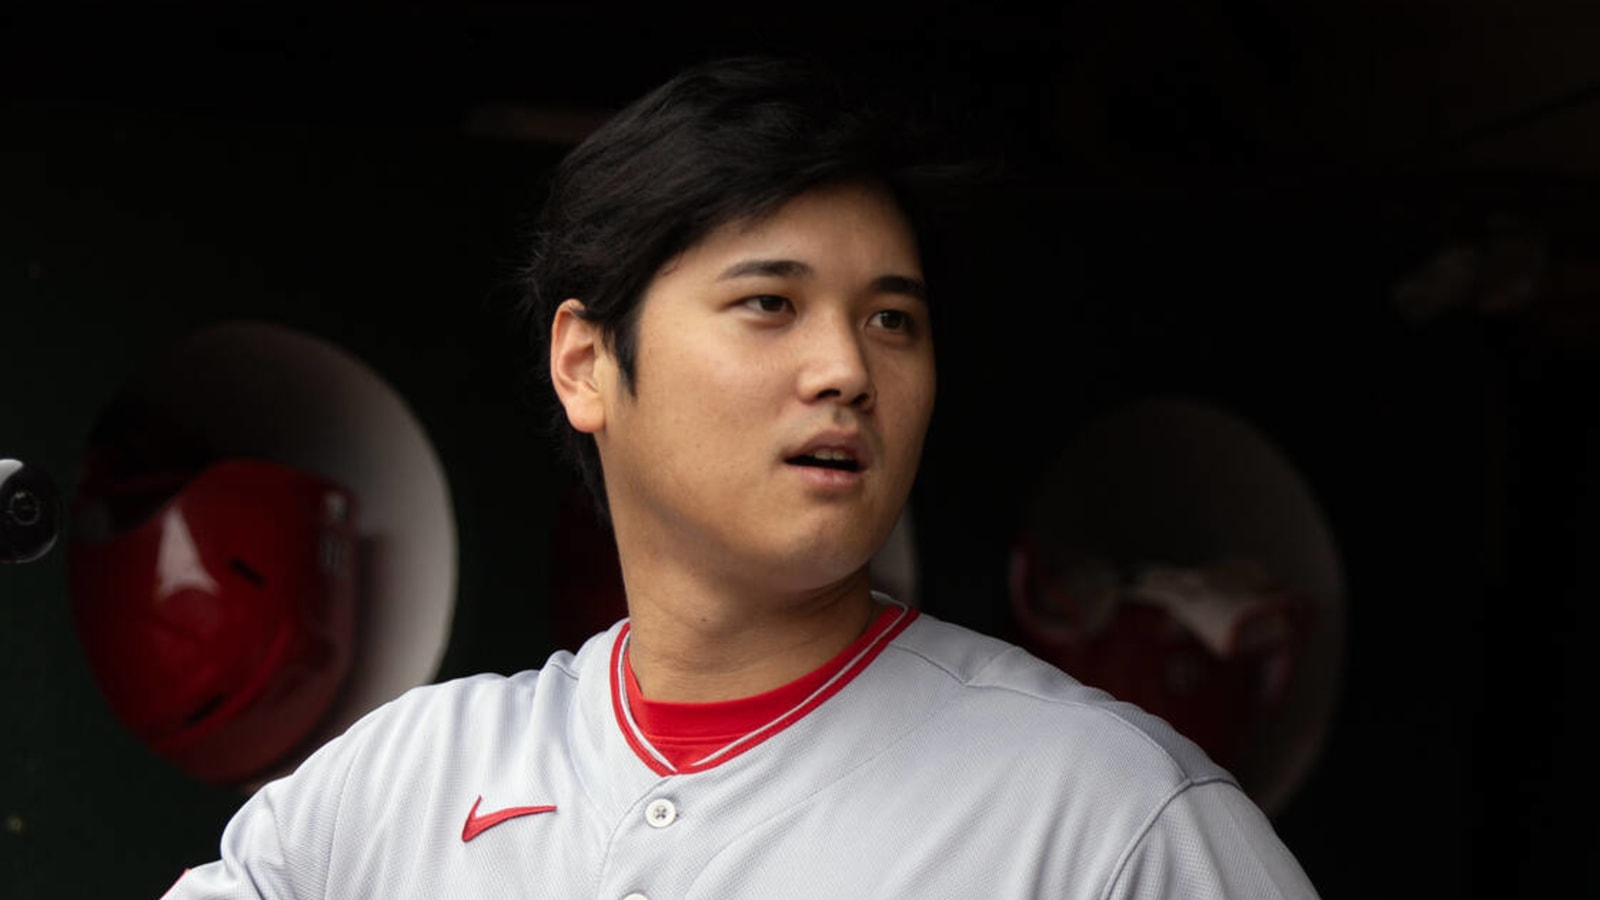 Exploring luxury tax implications of Shohei Ohtani’s contract